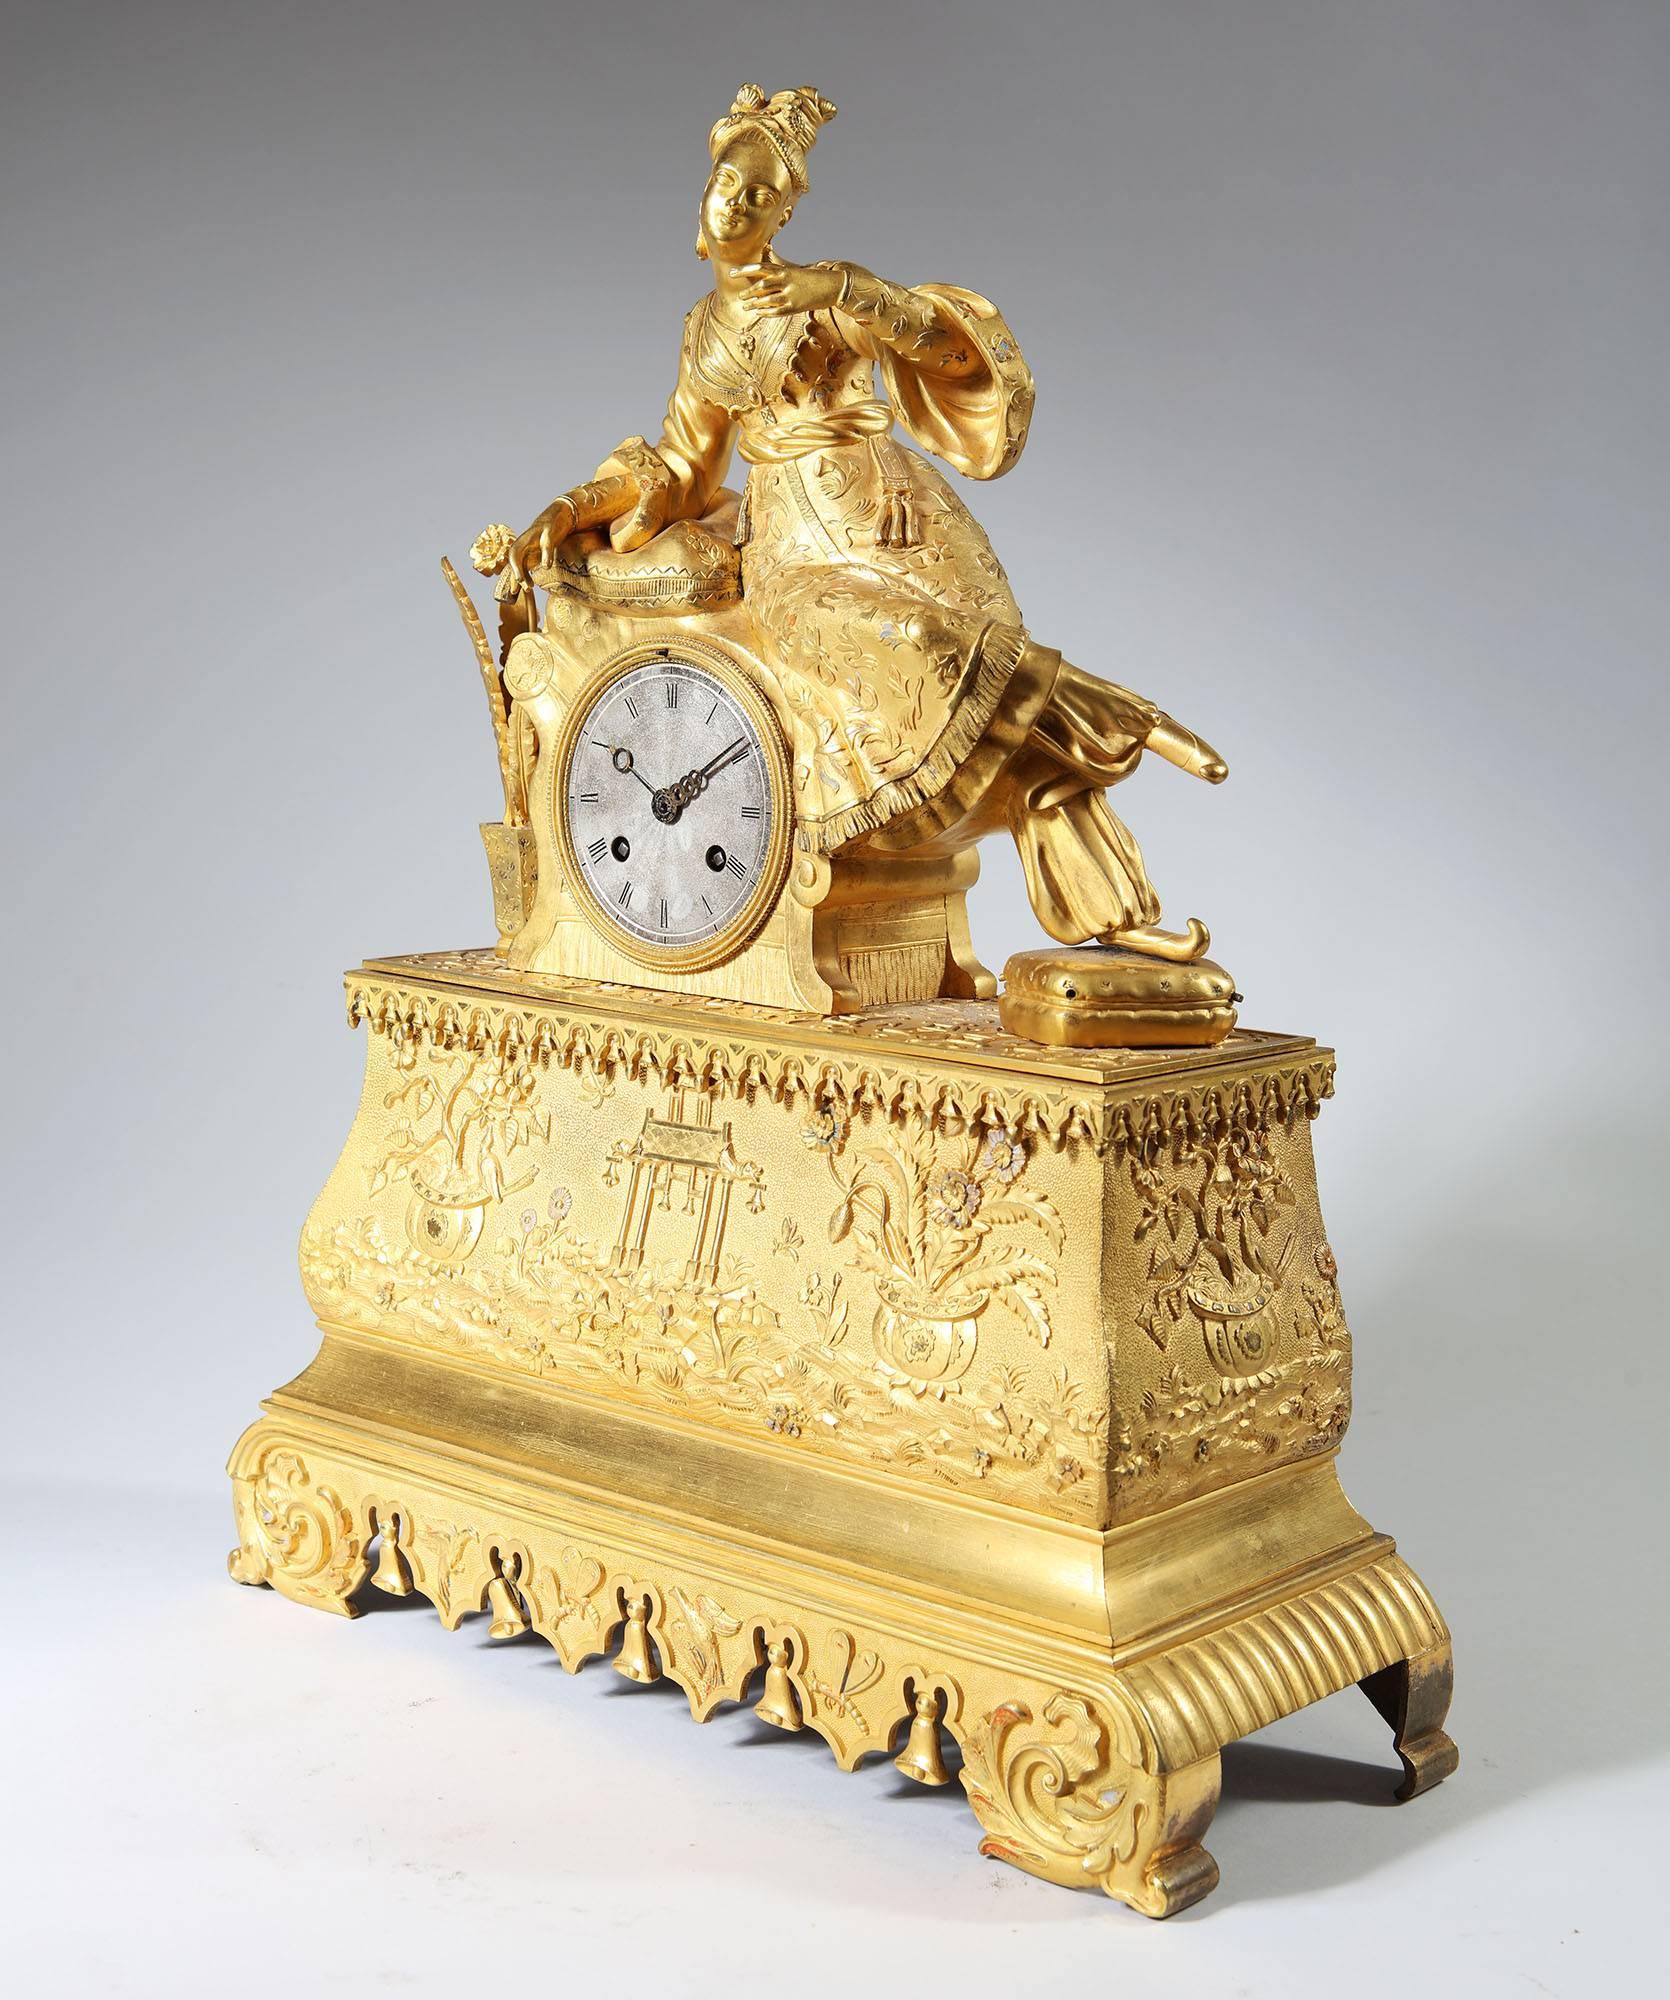 A 19th century gilt bronze clock with a seated lady in Ottoman dress resting on cushions with her arm raised possibly originally holding a bird or similar. Raised on an ogee base with rich ornament of flower baskets, pagodas and rockeries o a